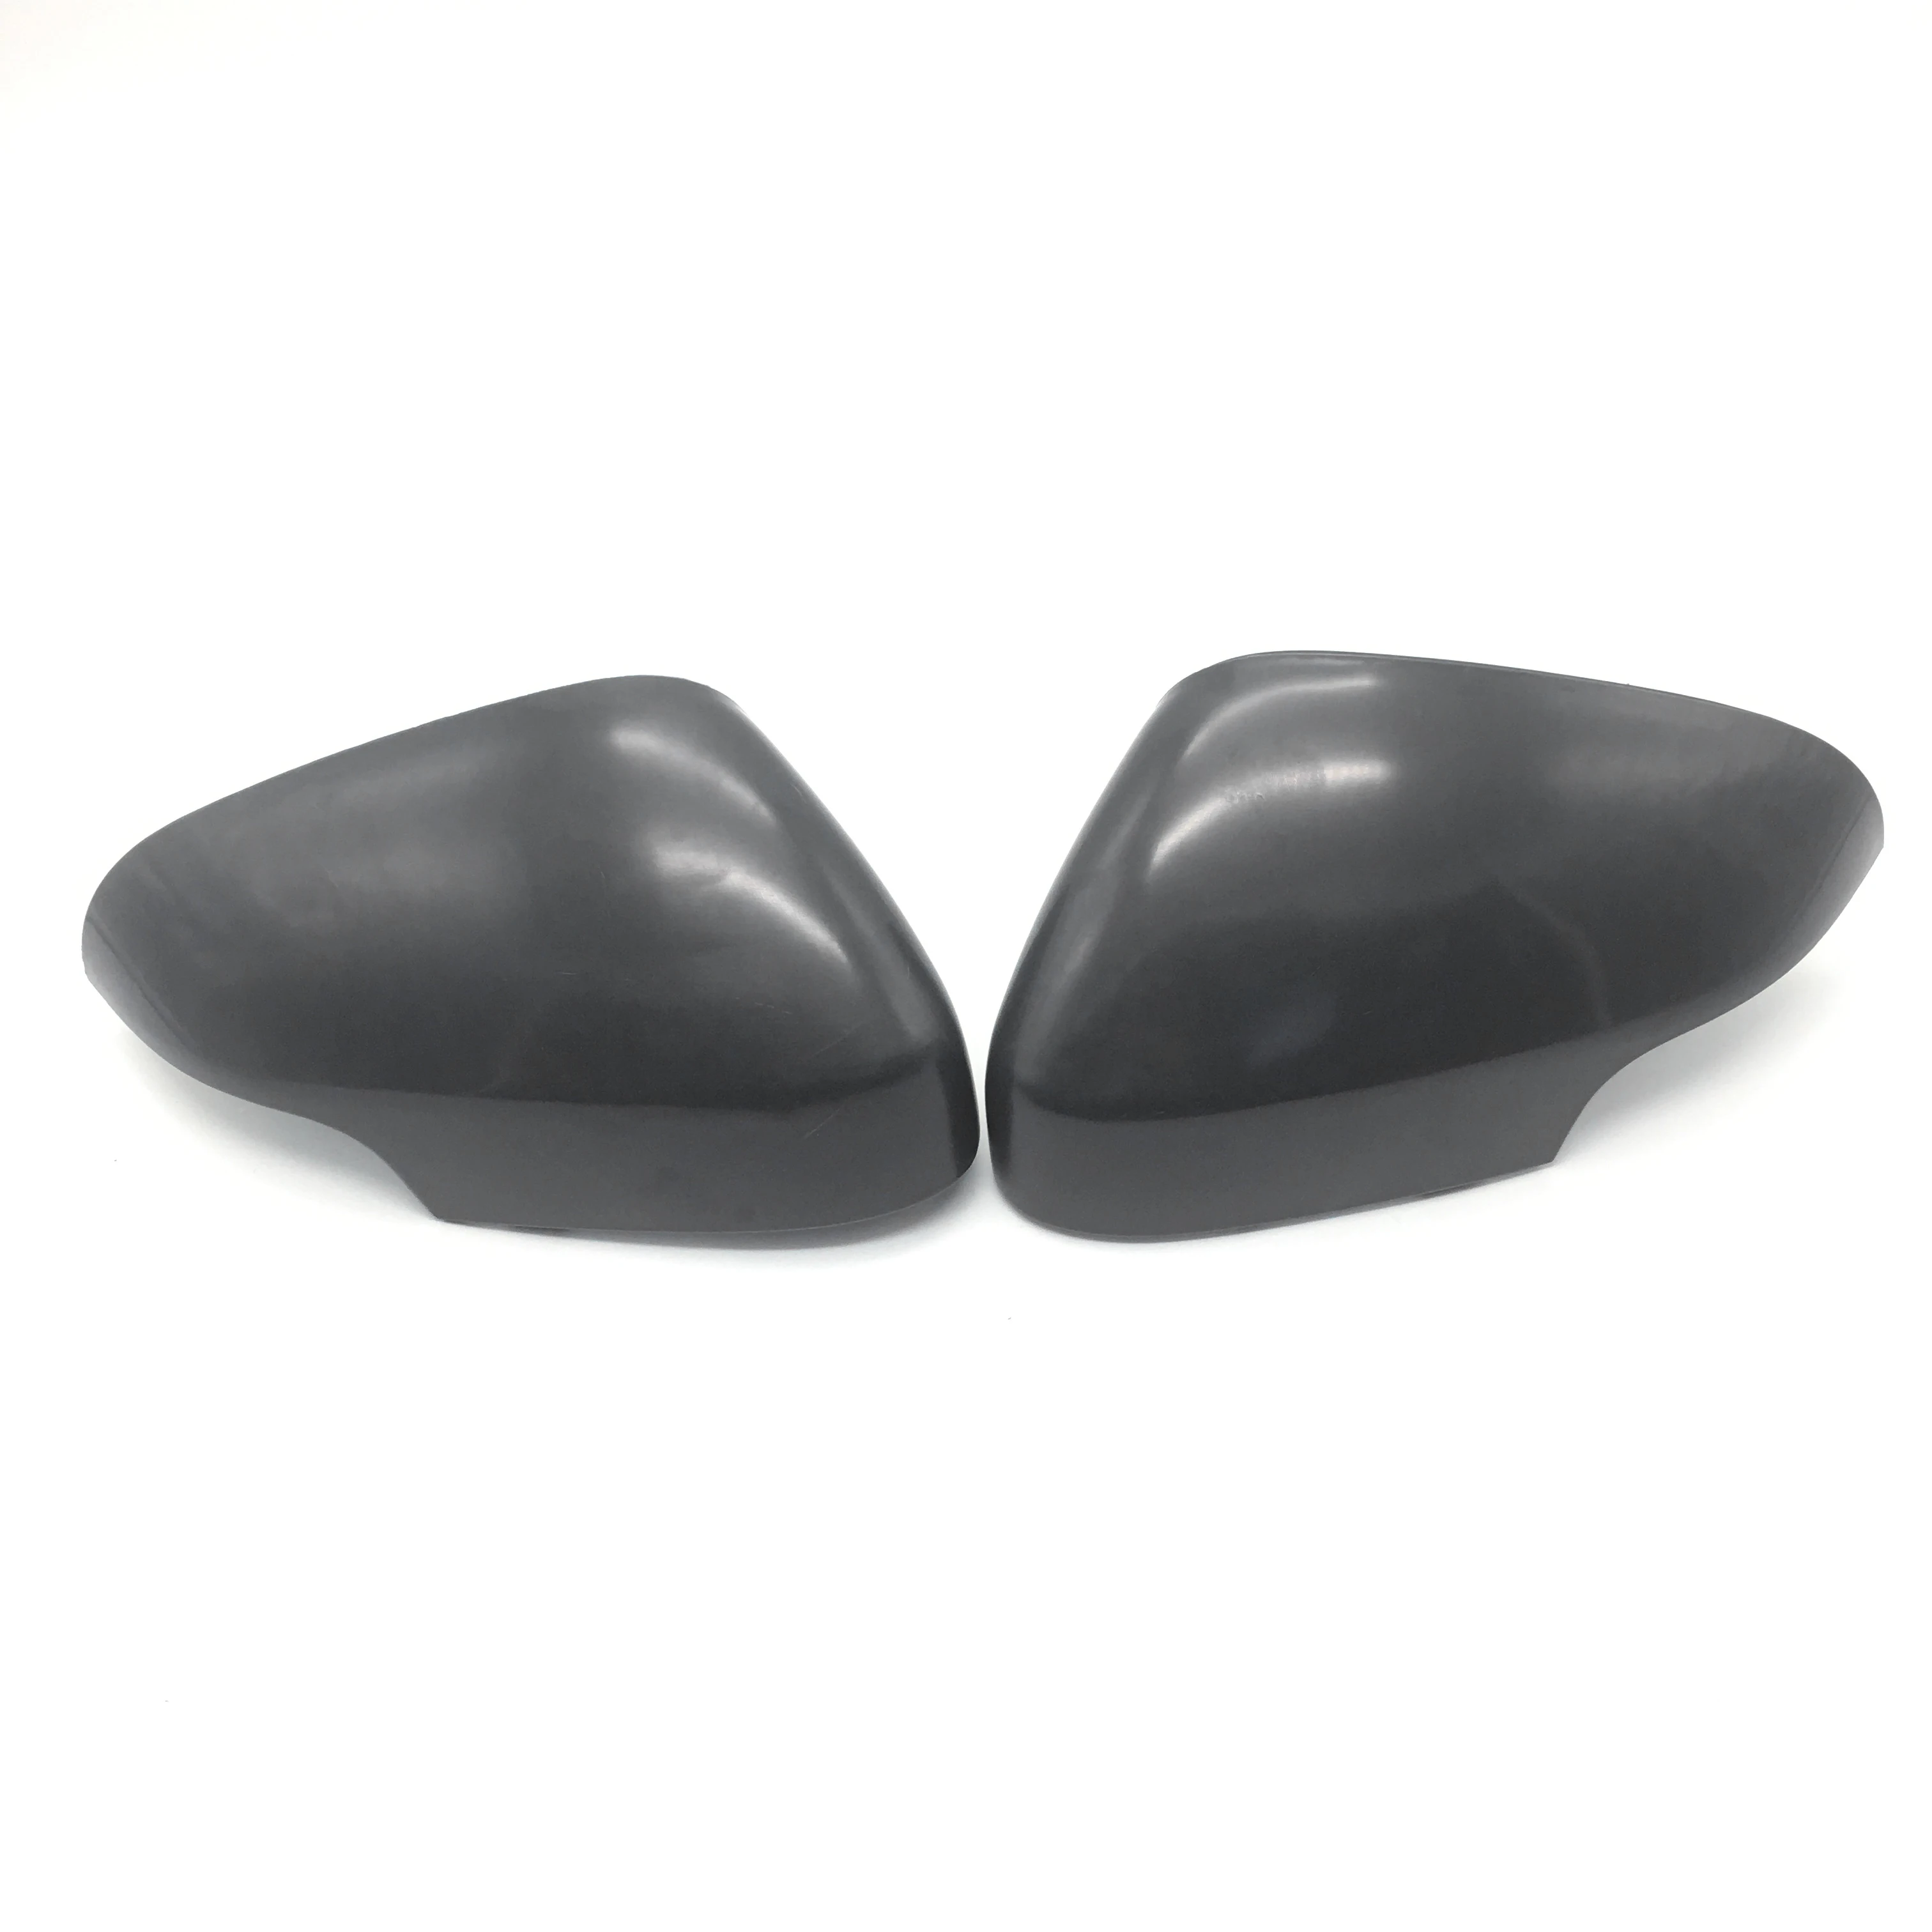 Car Side Mirror Covers Caps door exterior mirror Rearview Mirror Shell Housing For Volvo S80 V70 V50 V40 S40 C70 C30